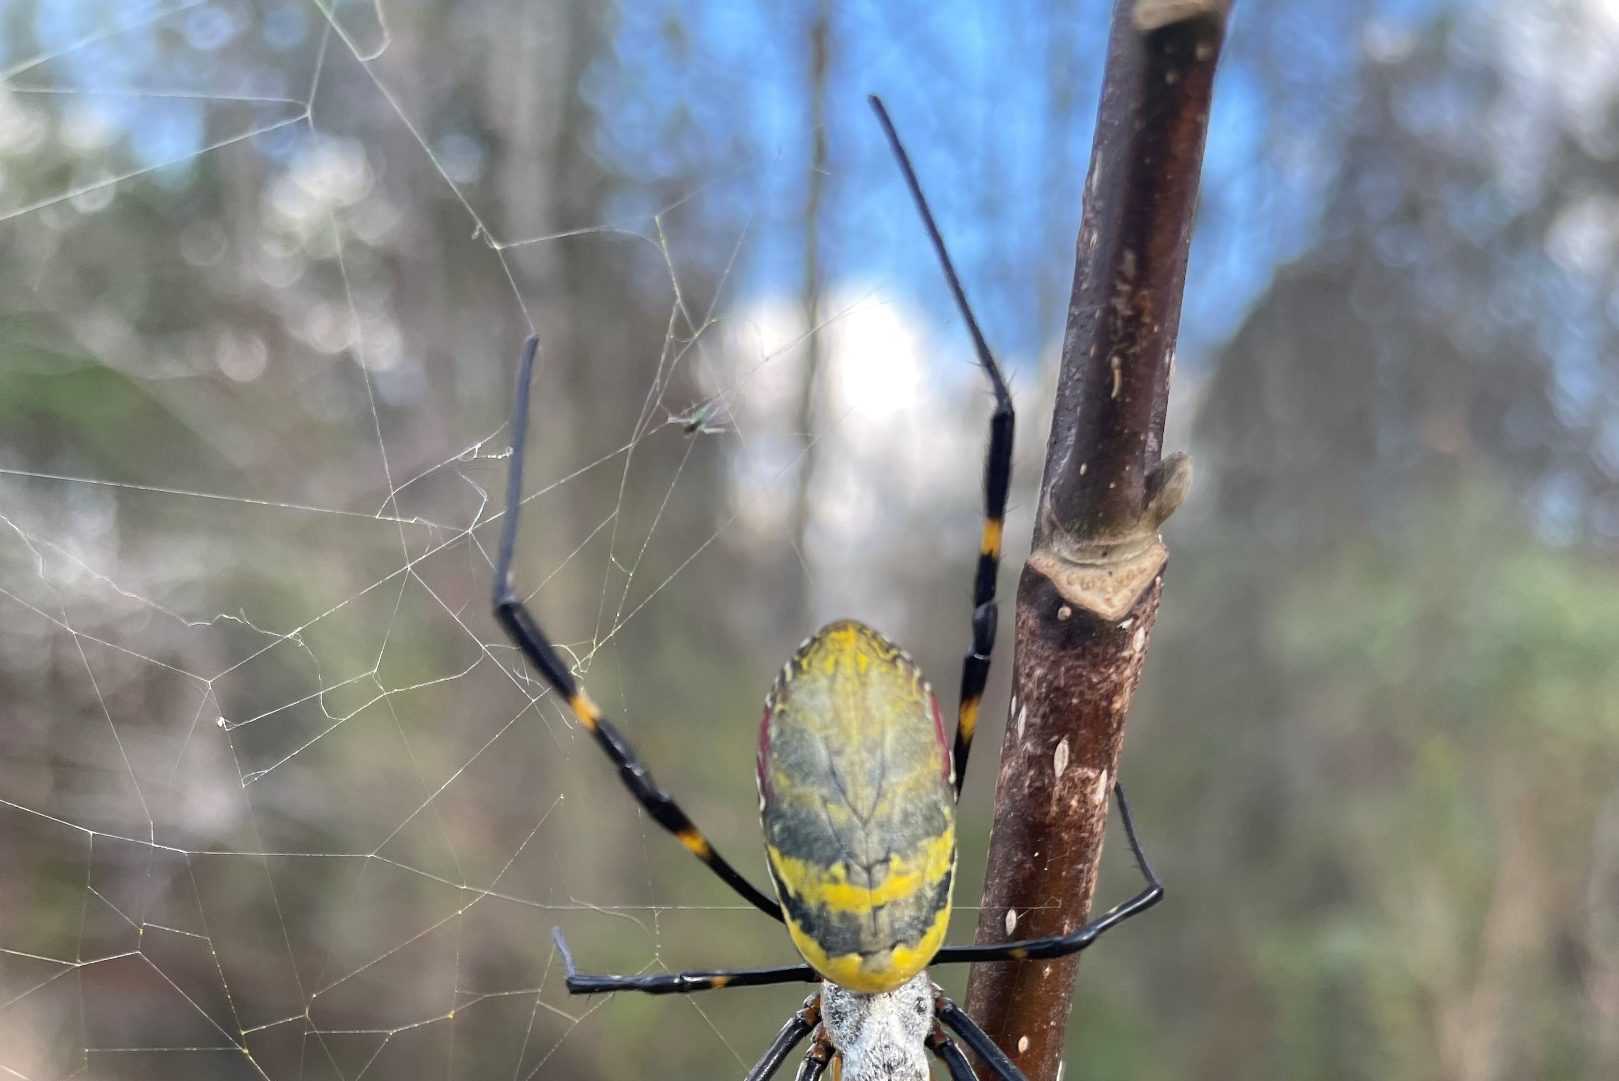 Black and Yellow Spiders - The Infinite Spider